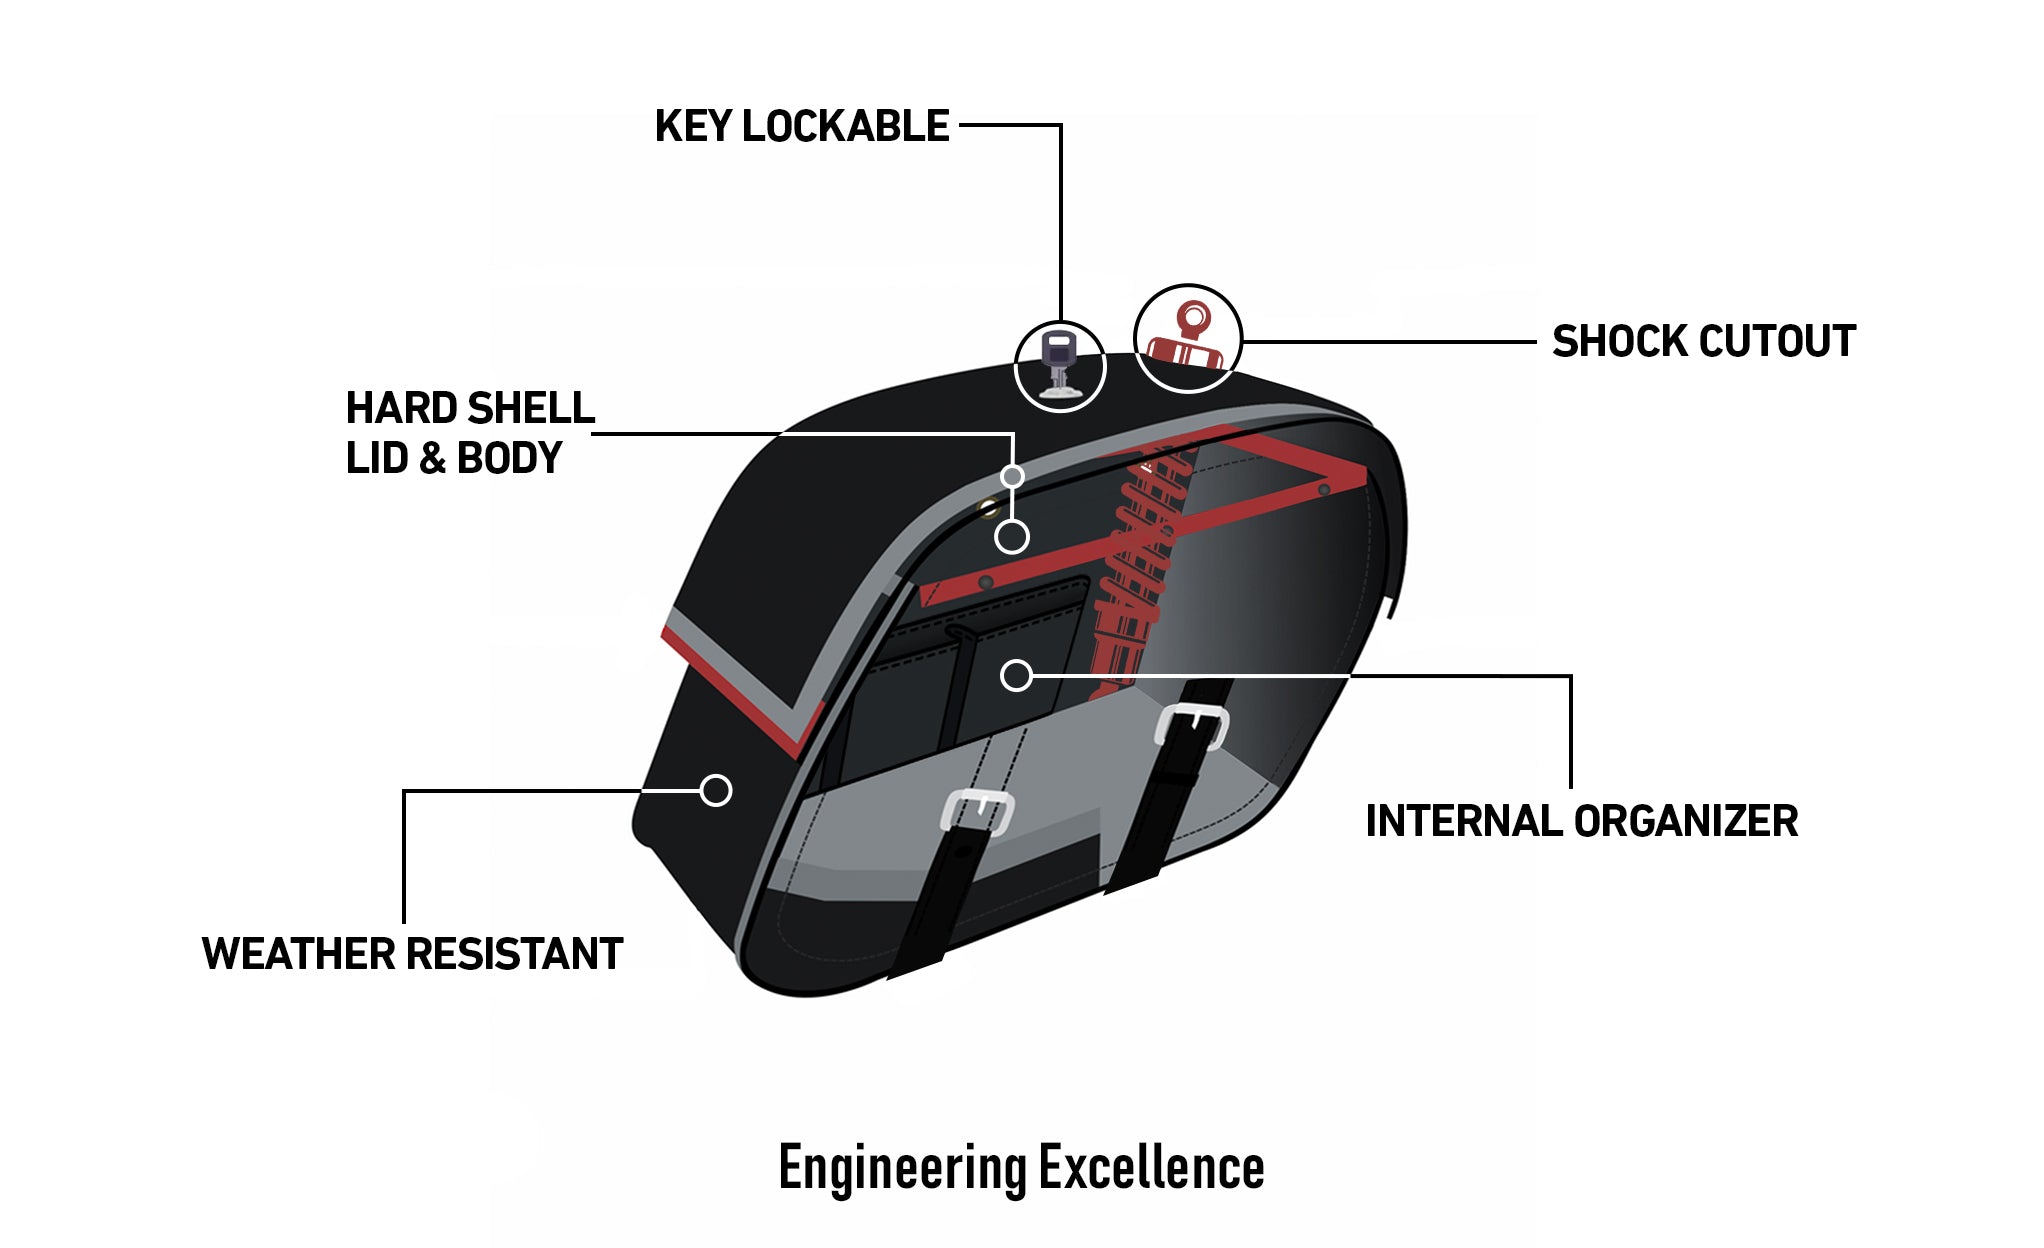 Viking Raven Extra Large Honda 1500 Valkyrie Interstate Shock Cut Out Leather Motorcycle Saddlebags Engineering Excellence with Bag on Bike @expand